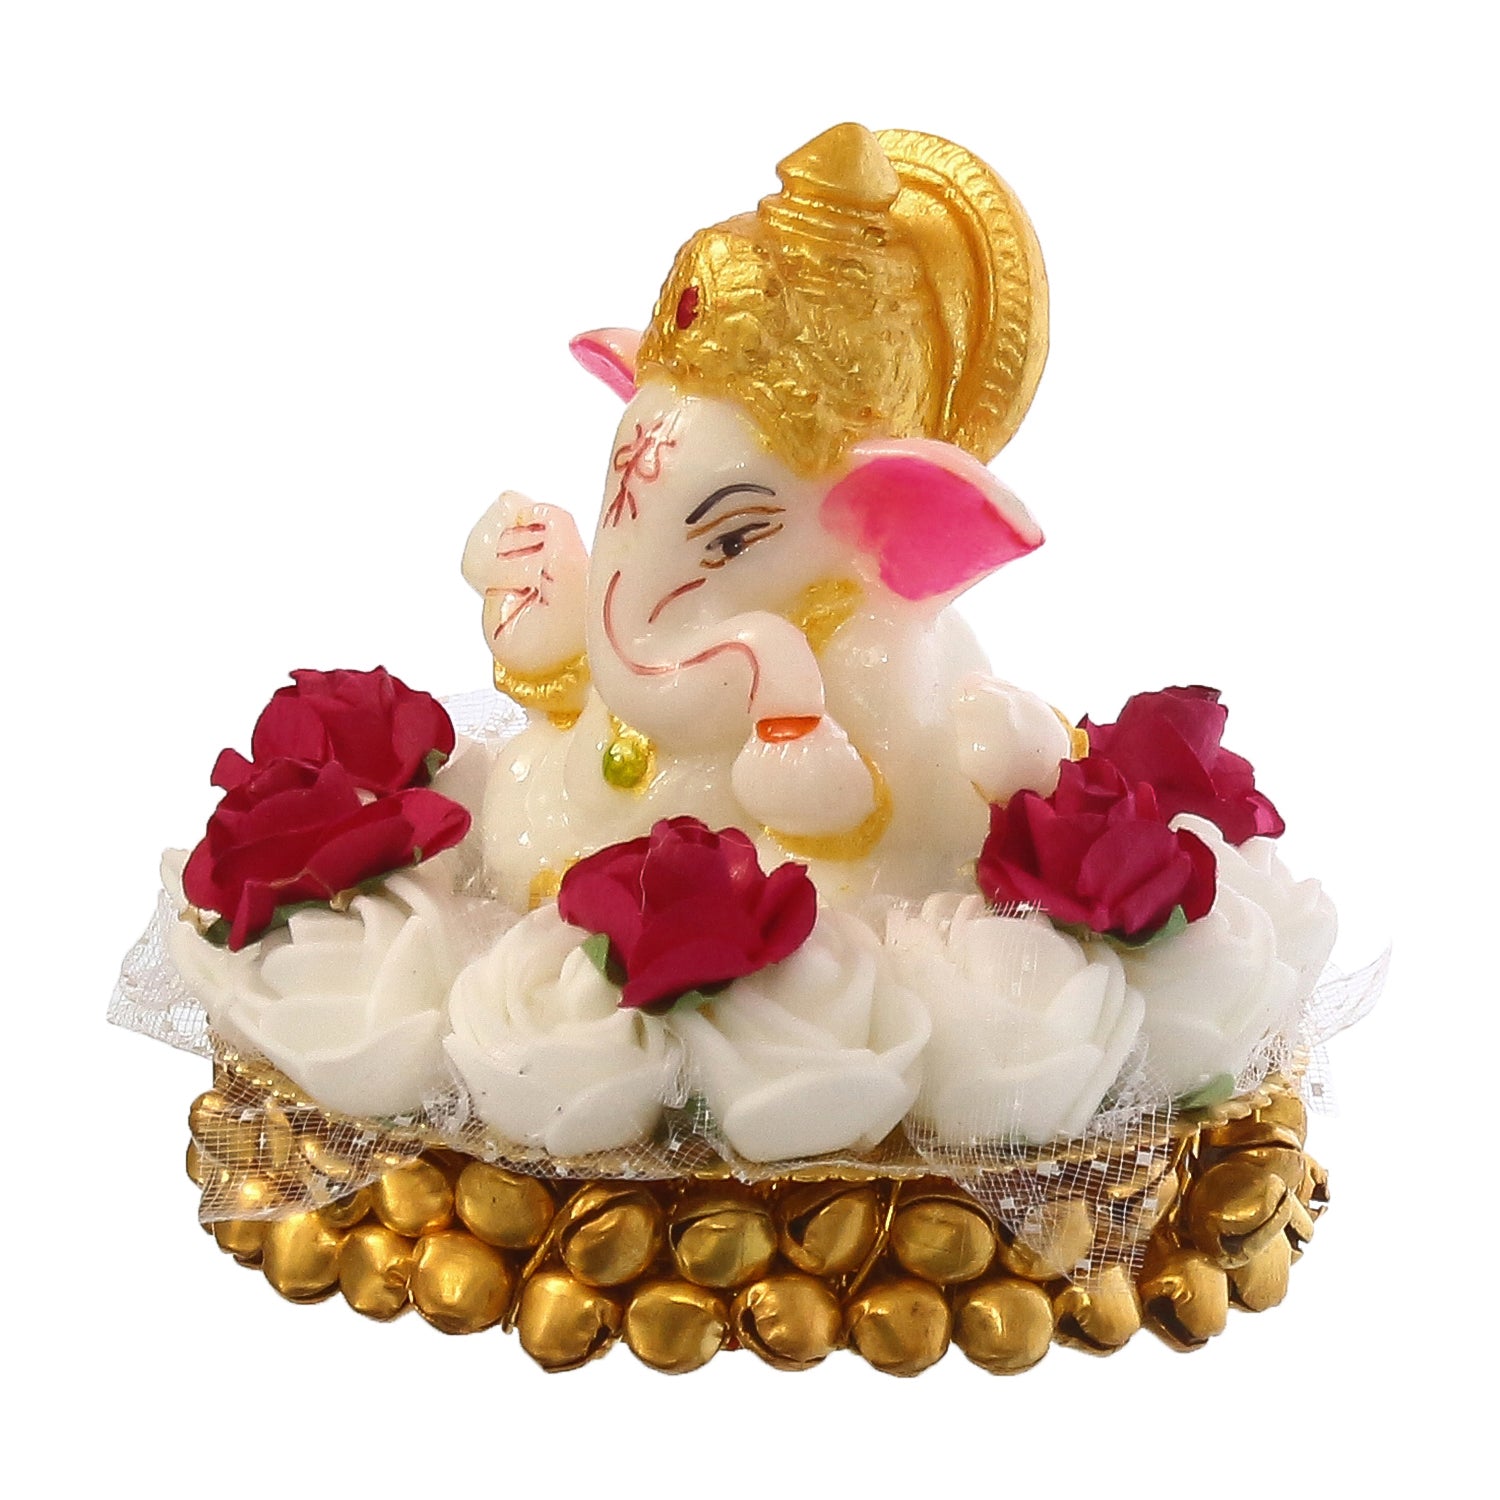 Lord Ganesha Idol on Decorative Handcrafted Plate with White Flowers 5